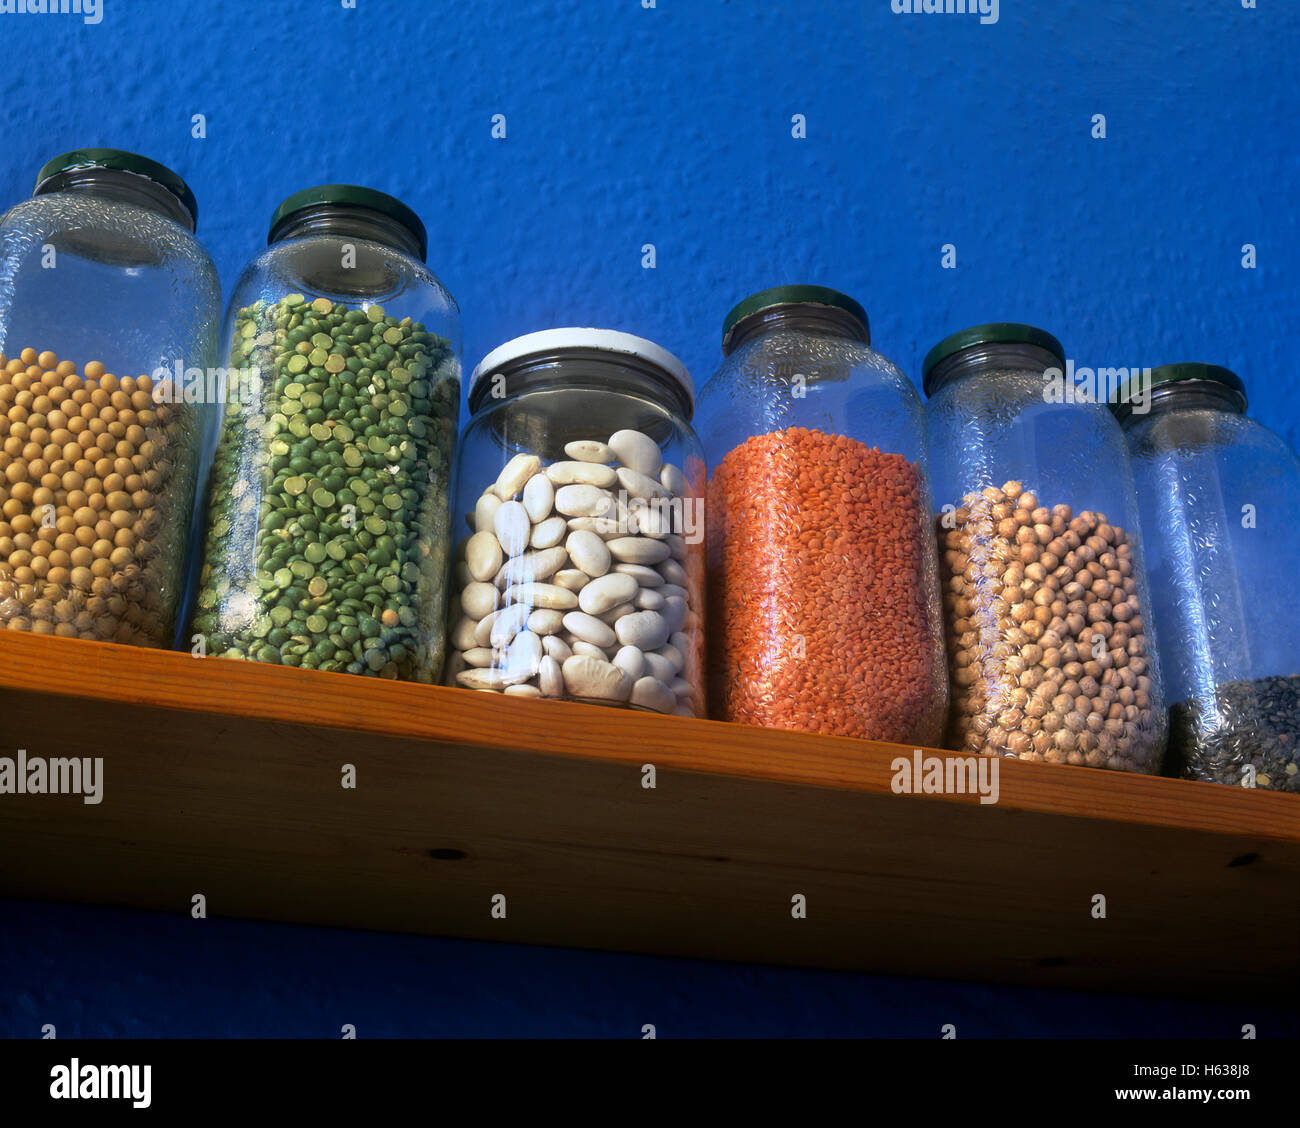 Pulses in storage jars on a kitchen shelf: soya beans, green split peas, butter beans, red lentils, chick peas, puy lentils. Stock Photo